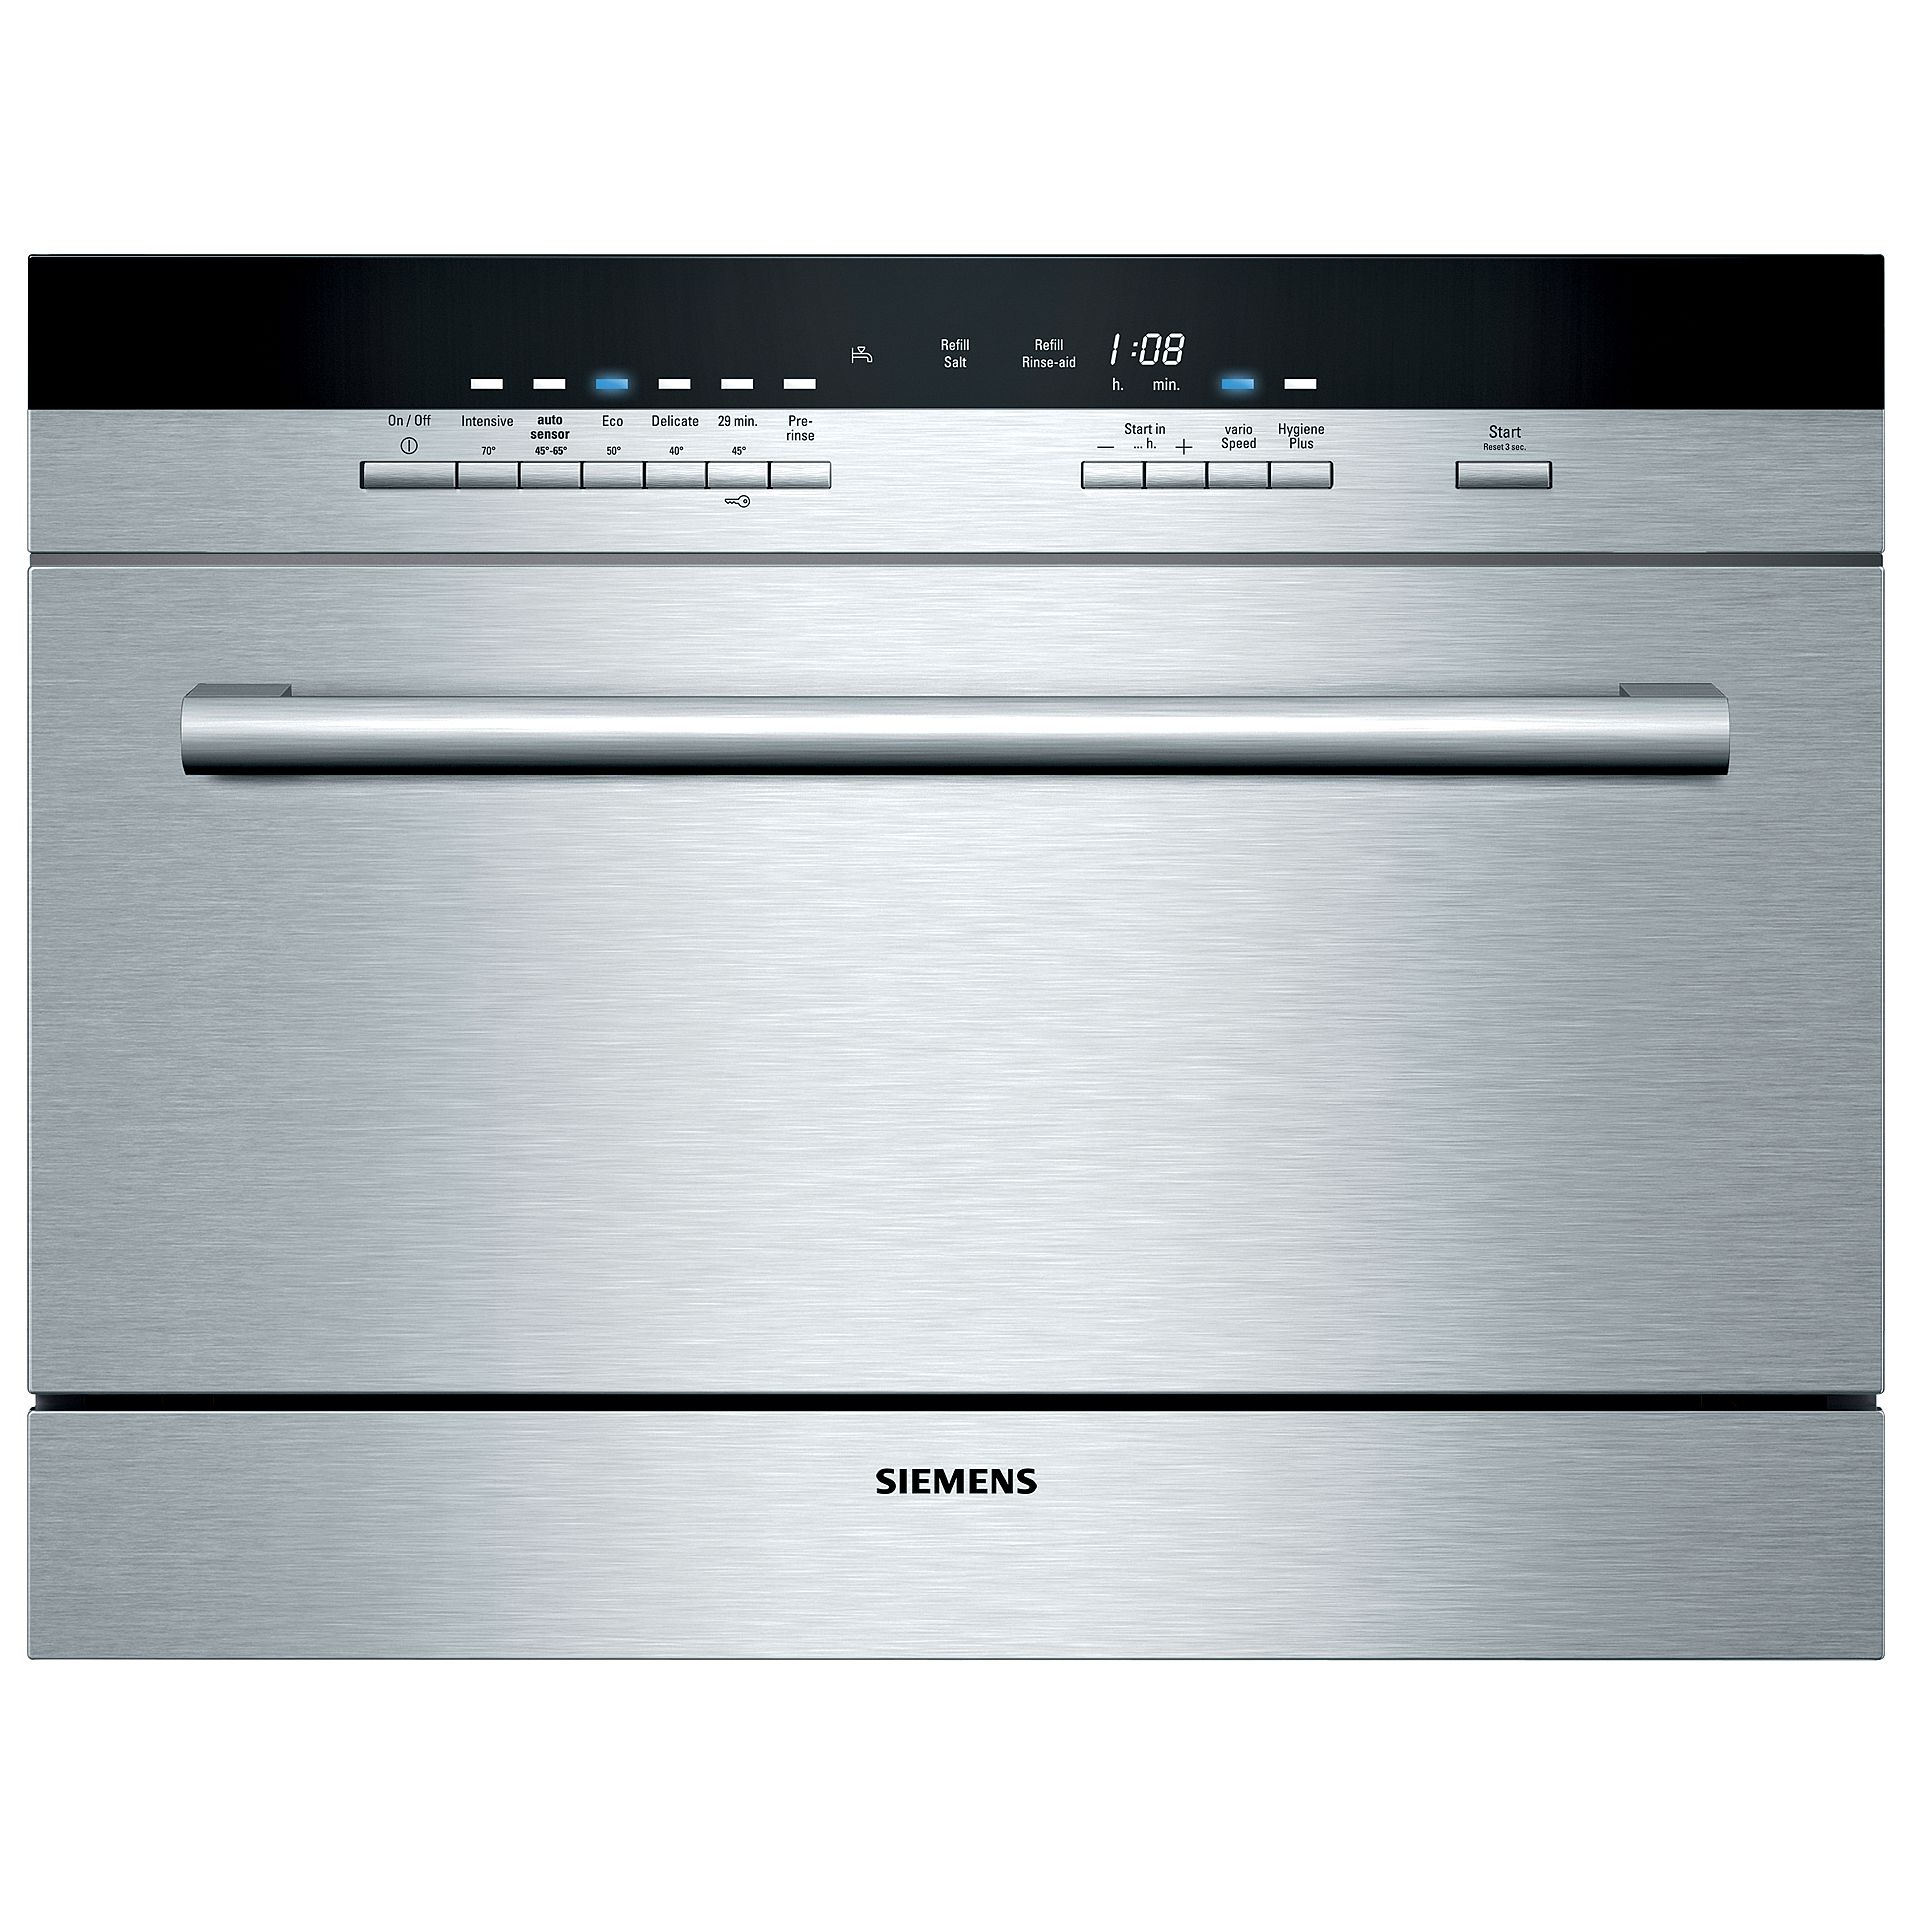 Siemens SK76M530GB Compact Integrated Dishwasher, Stainless Steel at John Lewis